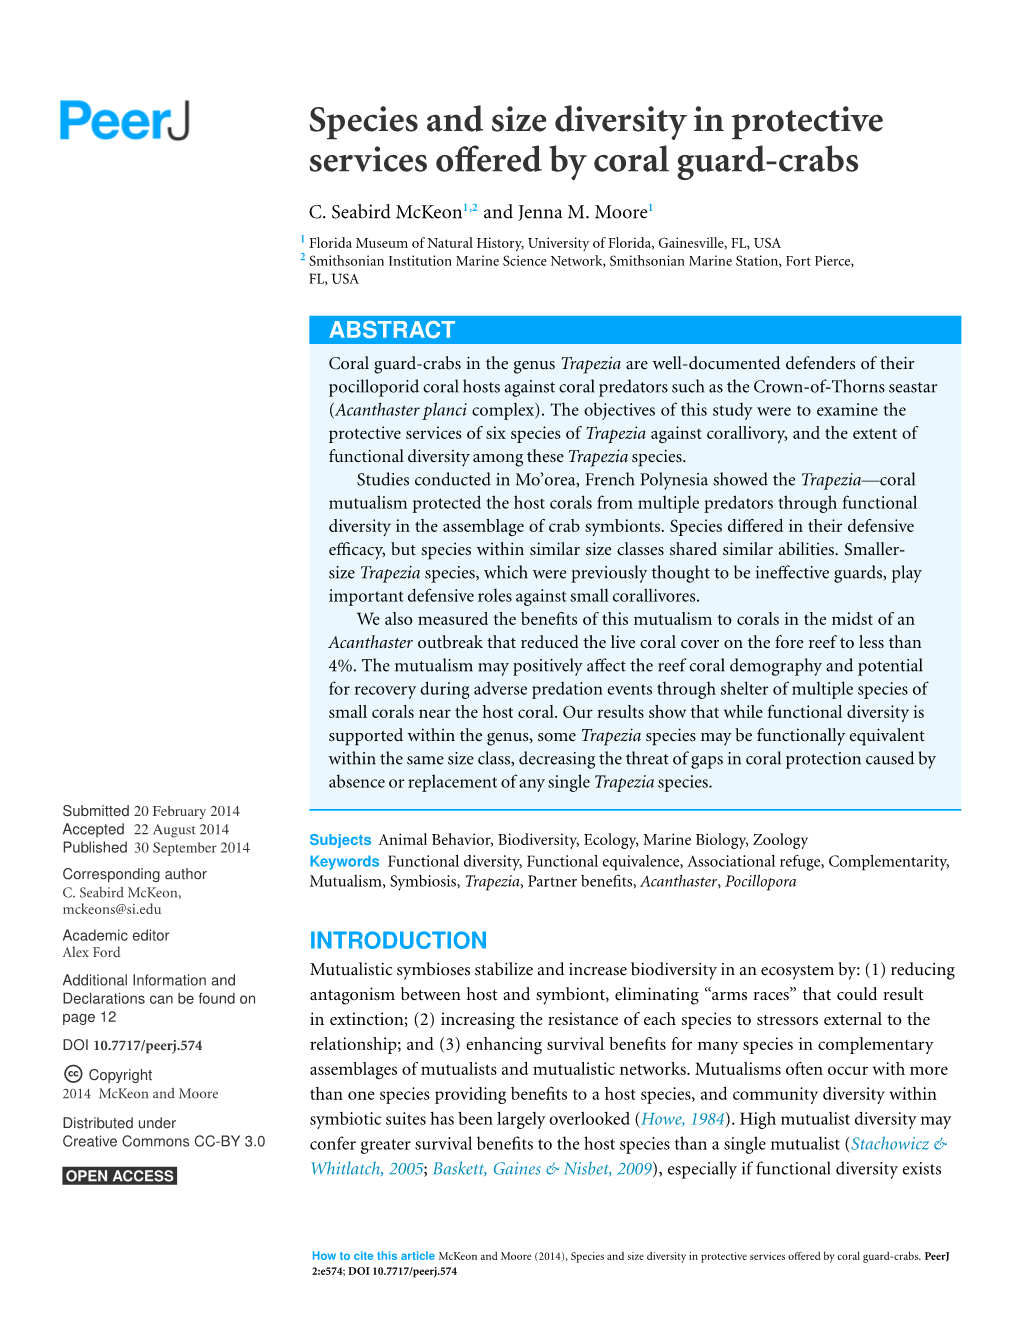 Species and Size Diversity in Protective Services Offered by Coral Guard-Crabs